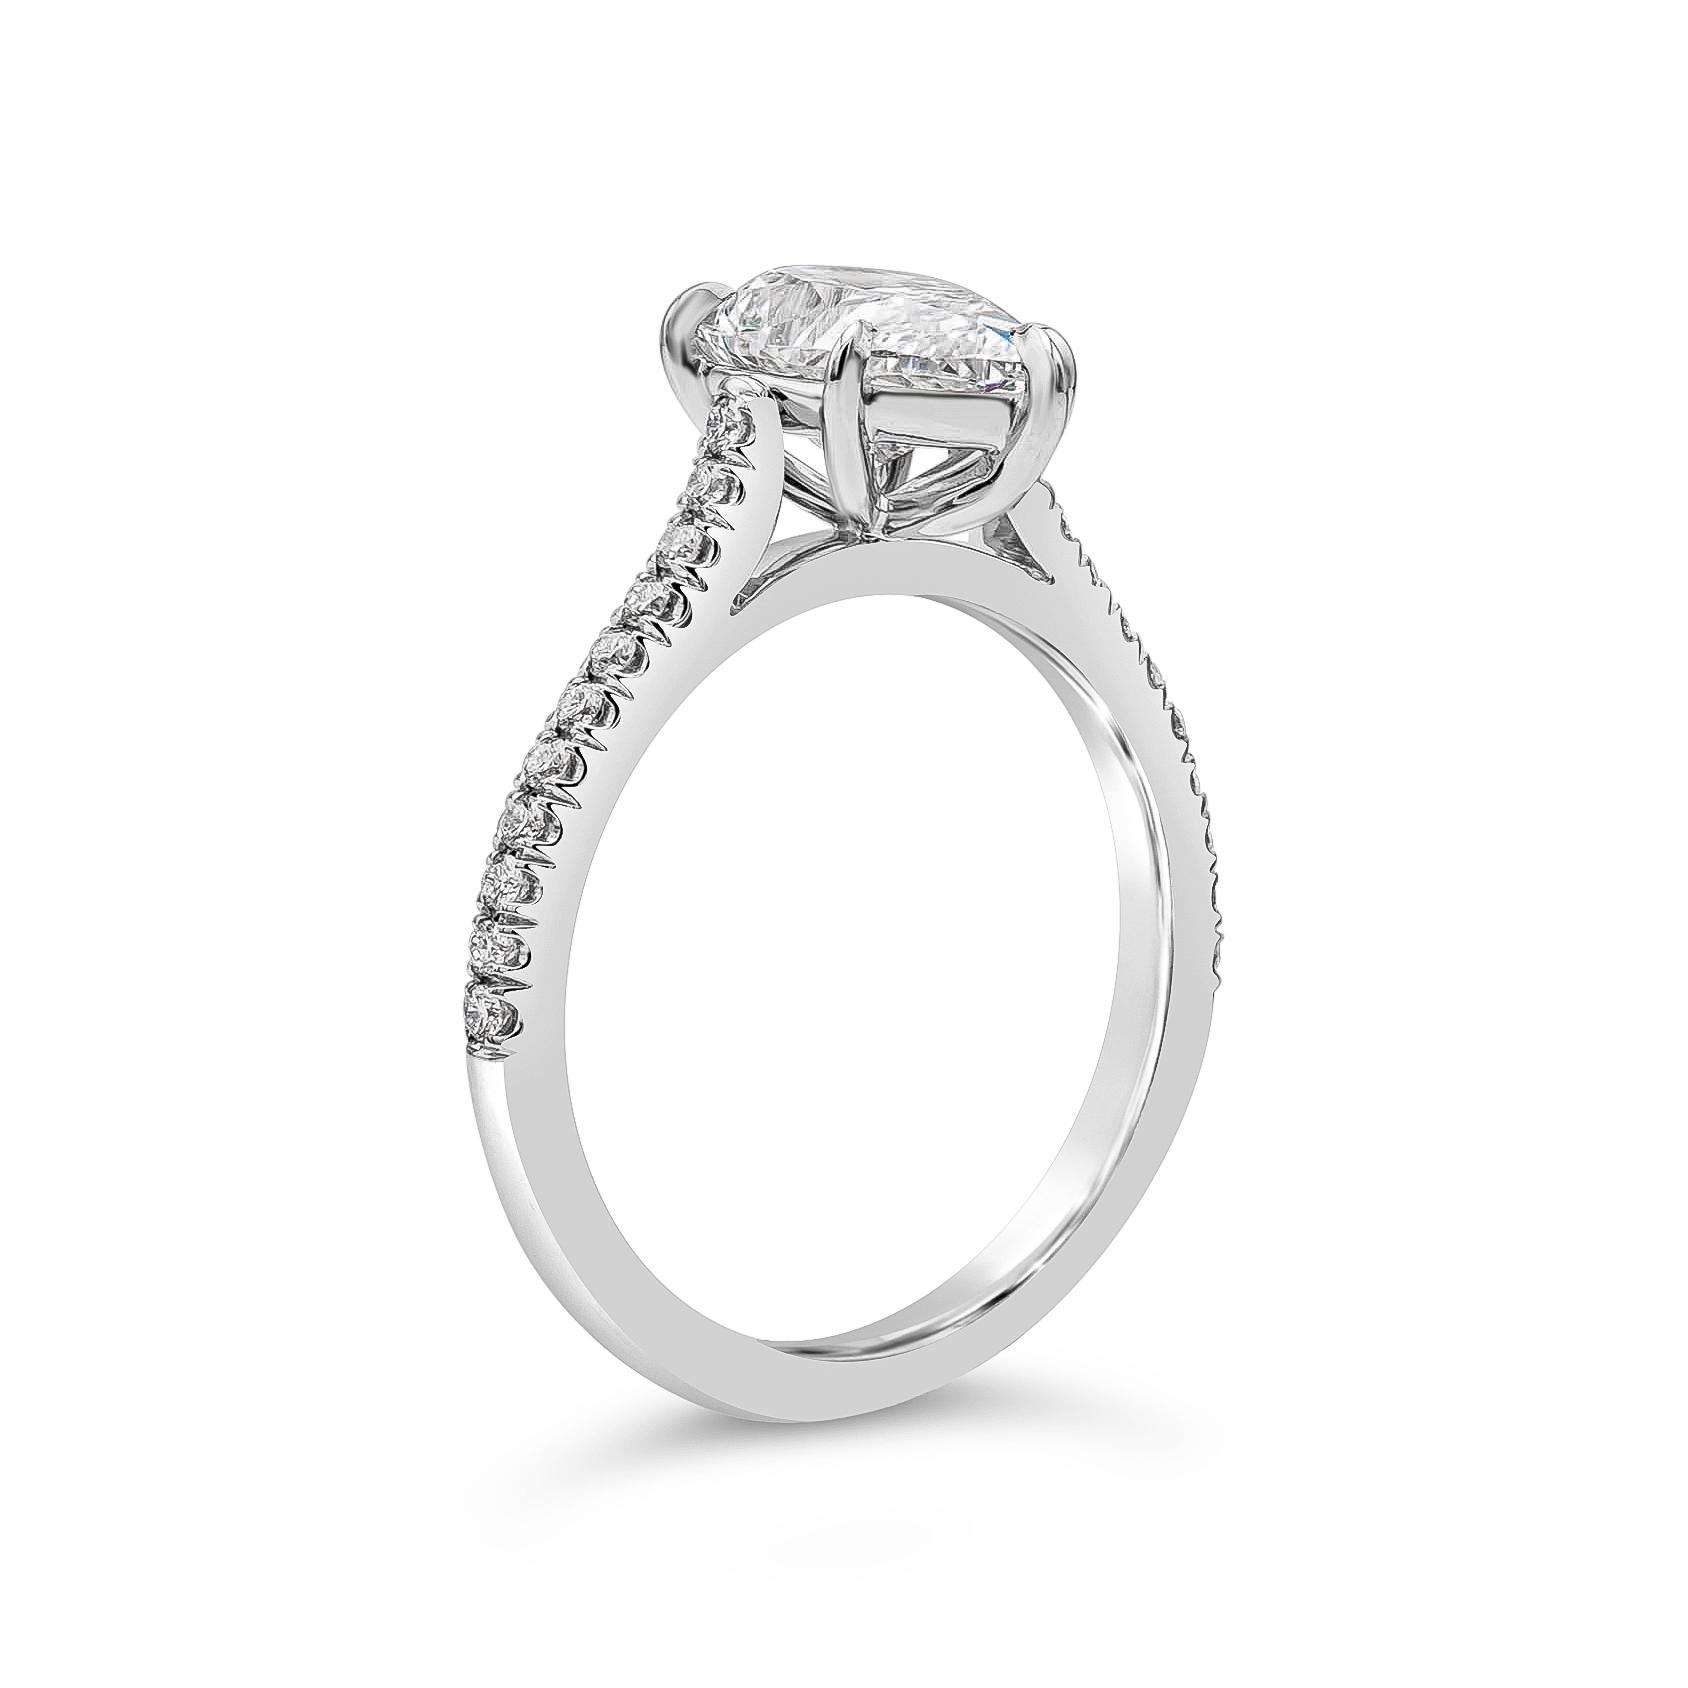 A classic and timeless engagement ring style showcasing a 1.84 carats pear shape diamond certified by GIA as E color and SI1 in clarity, set in a five prong basket setting and encrusted with 22 brilliant round diamonds on the shank of the ring